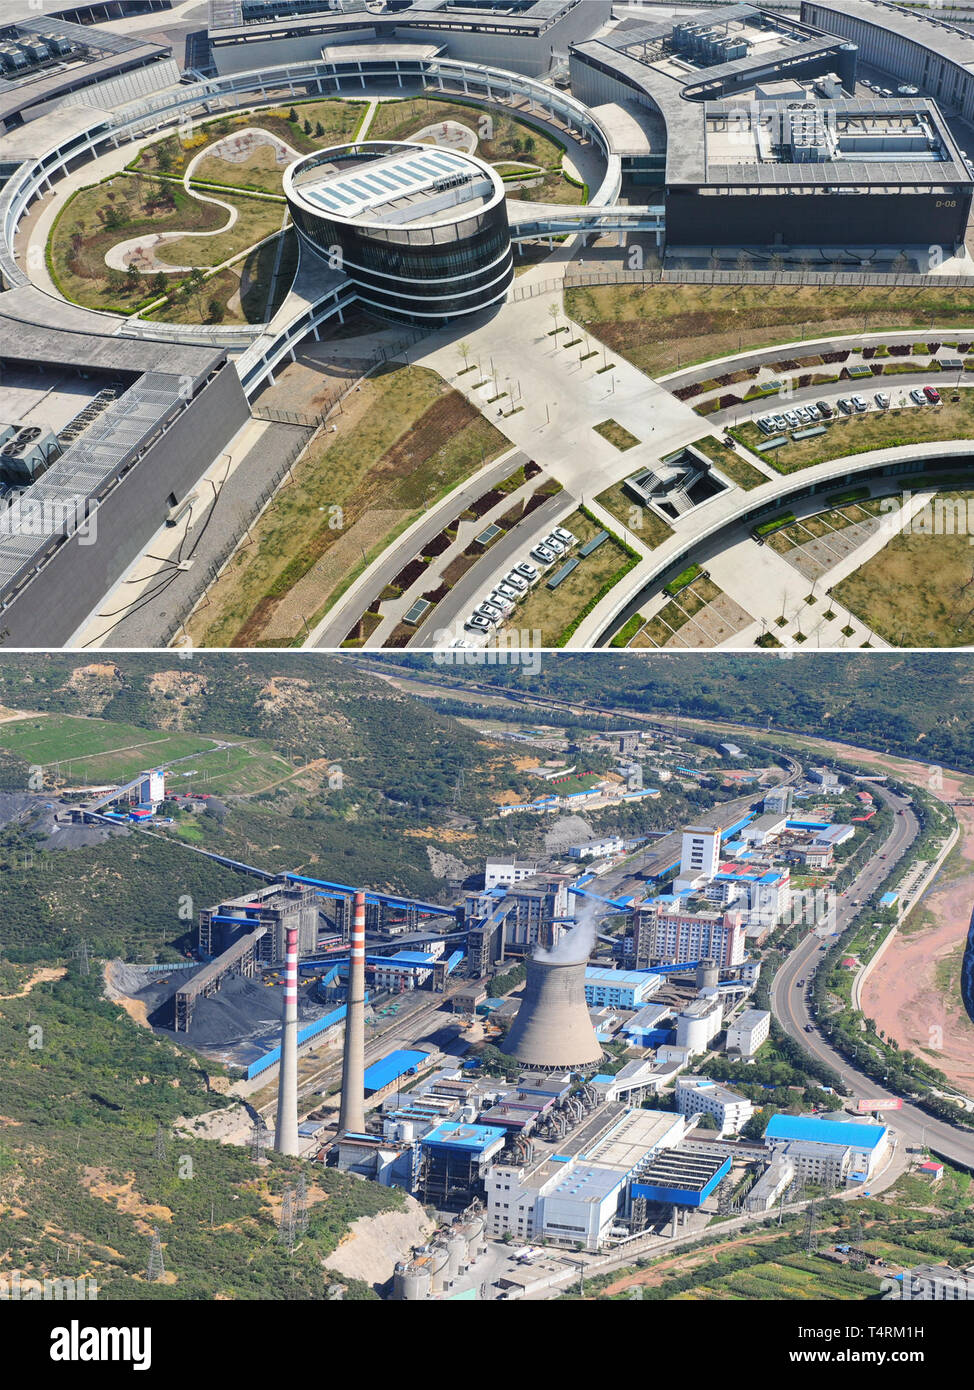 (190419) -- YANGQUAN, April 19, 2019 (Xinhua) -- Combination aerial photo shows the view of Baidu's cloud computing center (above) at the economic and technological development zone in Yangquan, north China's Shanxi Province, taken by Yang Chenguang on April 16, 2019, and the Xinjing coal mine (below, file photo) of the Yangquan Coal Industry (Group) Co., Ltd. in Yangquan, on Sept. 22, 2011. Yangquan has been transforming from a coal-dependent city to a city applying new technologies of Big Data and information services to various aspects of social life and developments. From harboring Baidu's Stock Photo